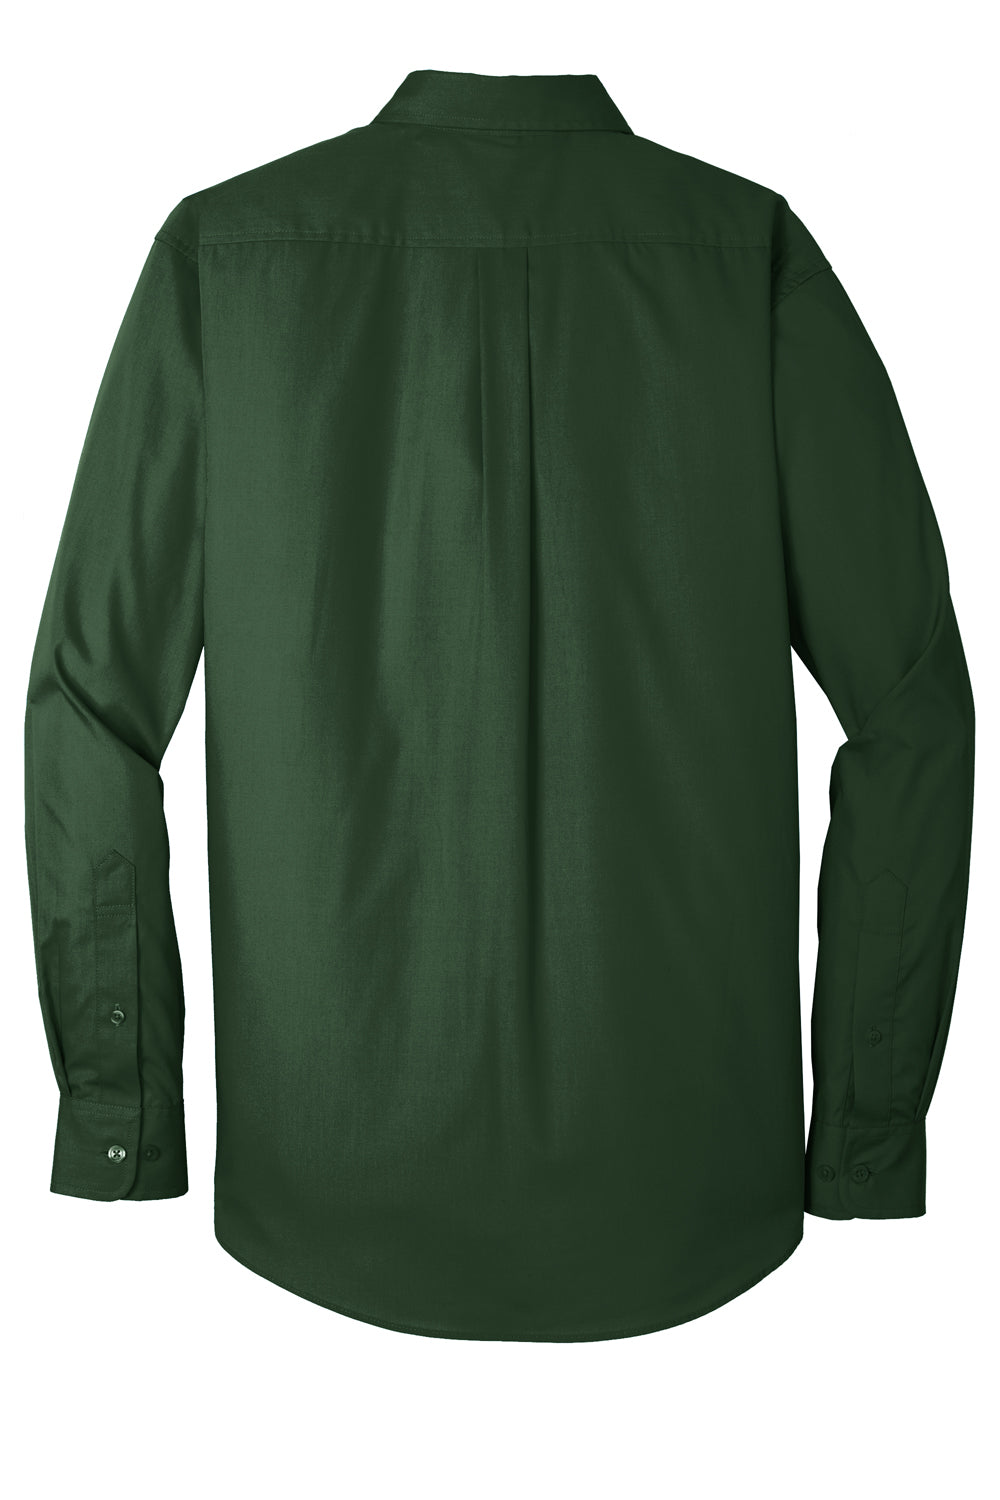 Port Authority W100/TW100 Carefree Stain Resistant Long Sleeve Button Down Shirt w/ Pocket Deep Forest Green Flat Back